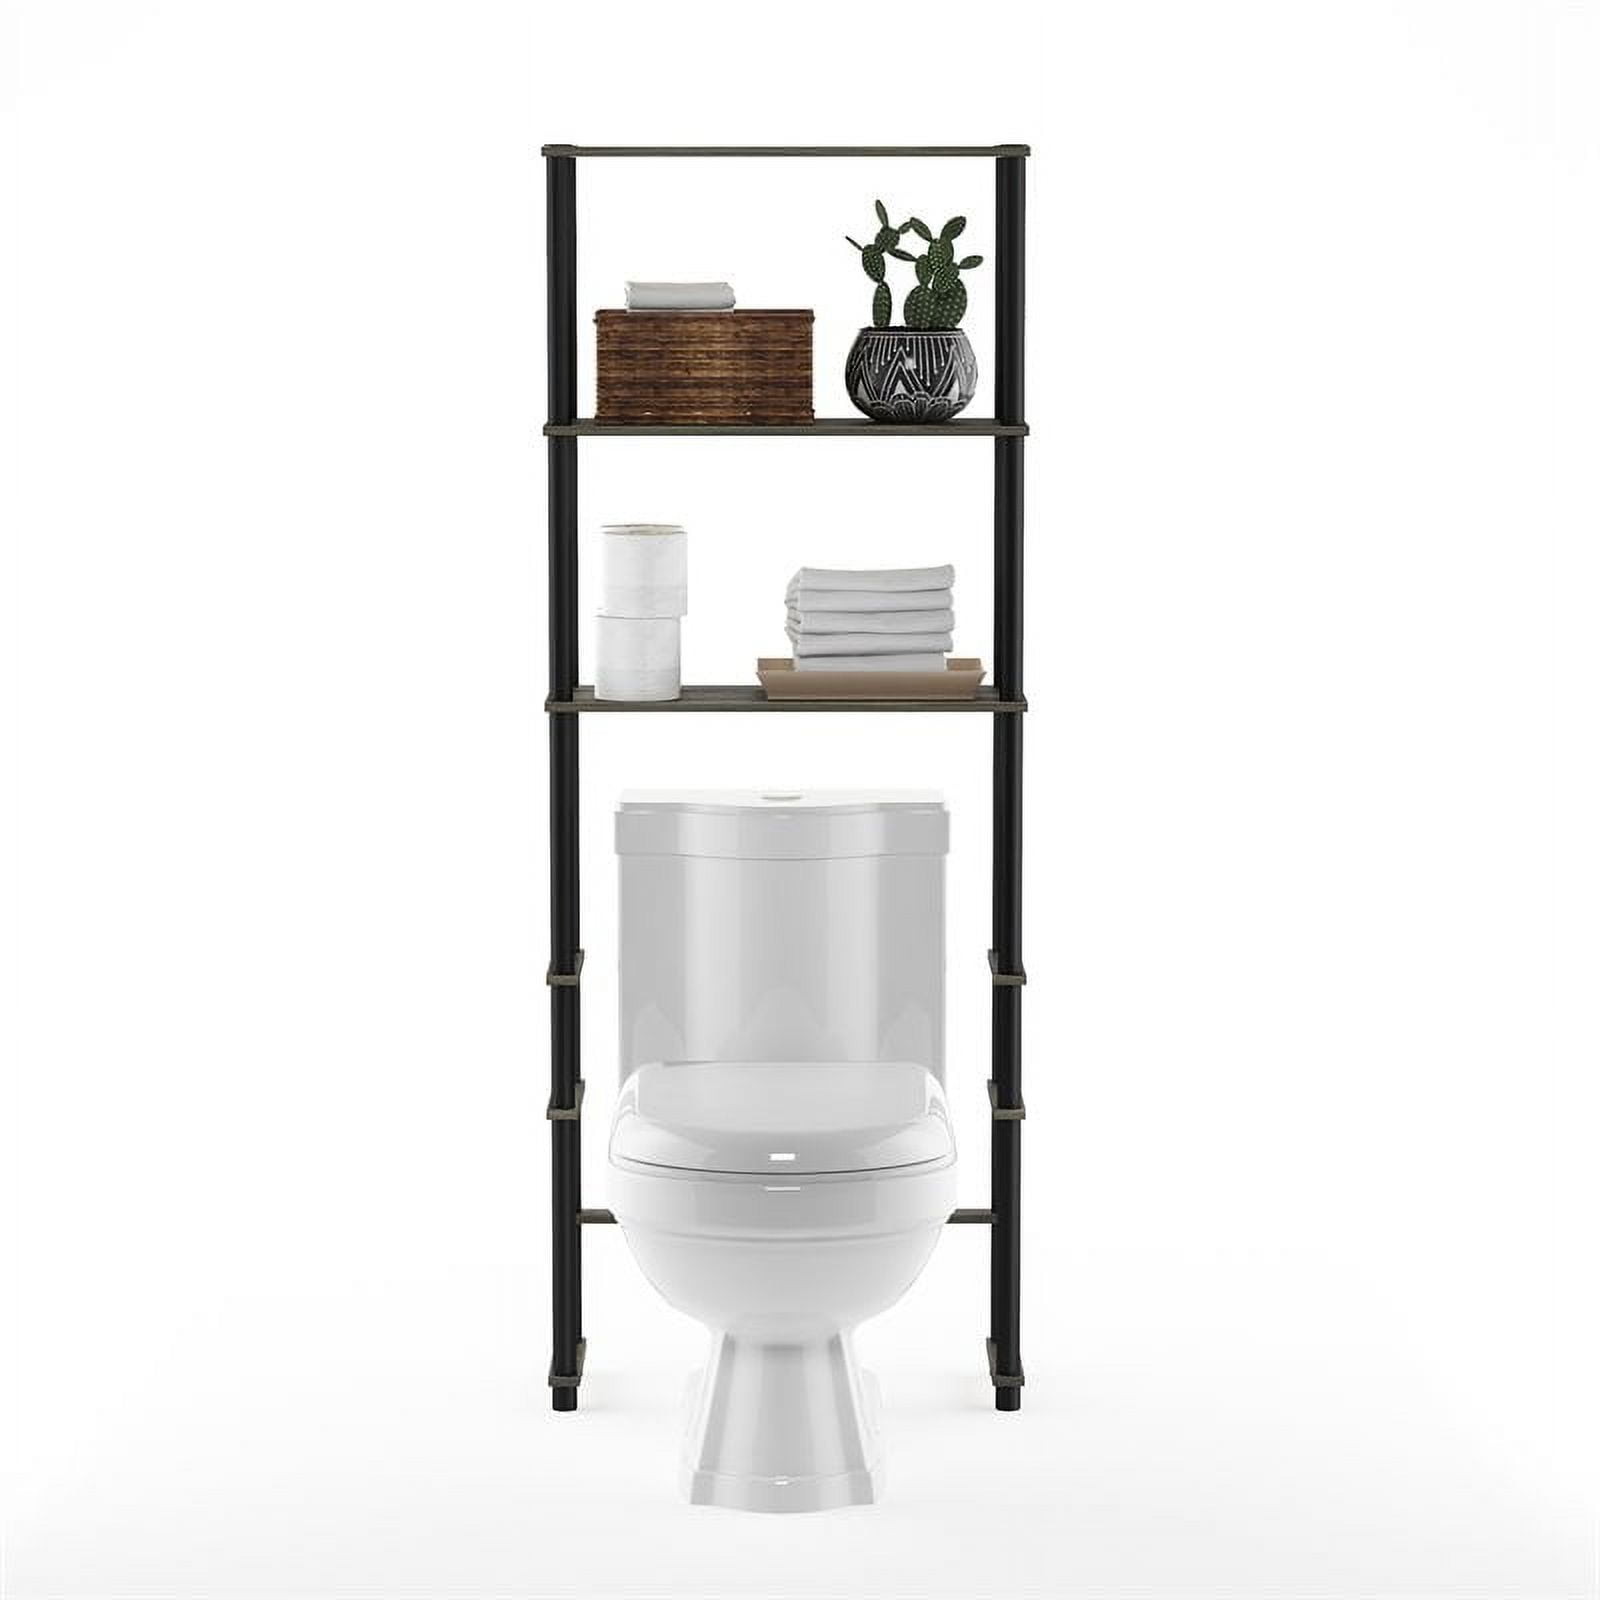 I Never Loved the Look an Over-the-Toilet Shelf — Until I Found